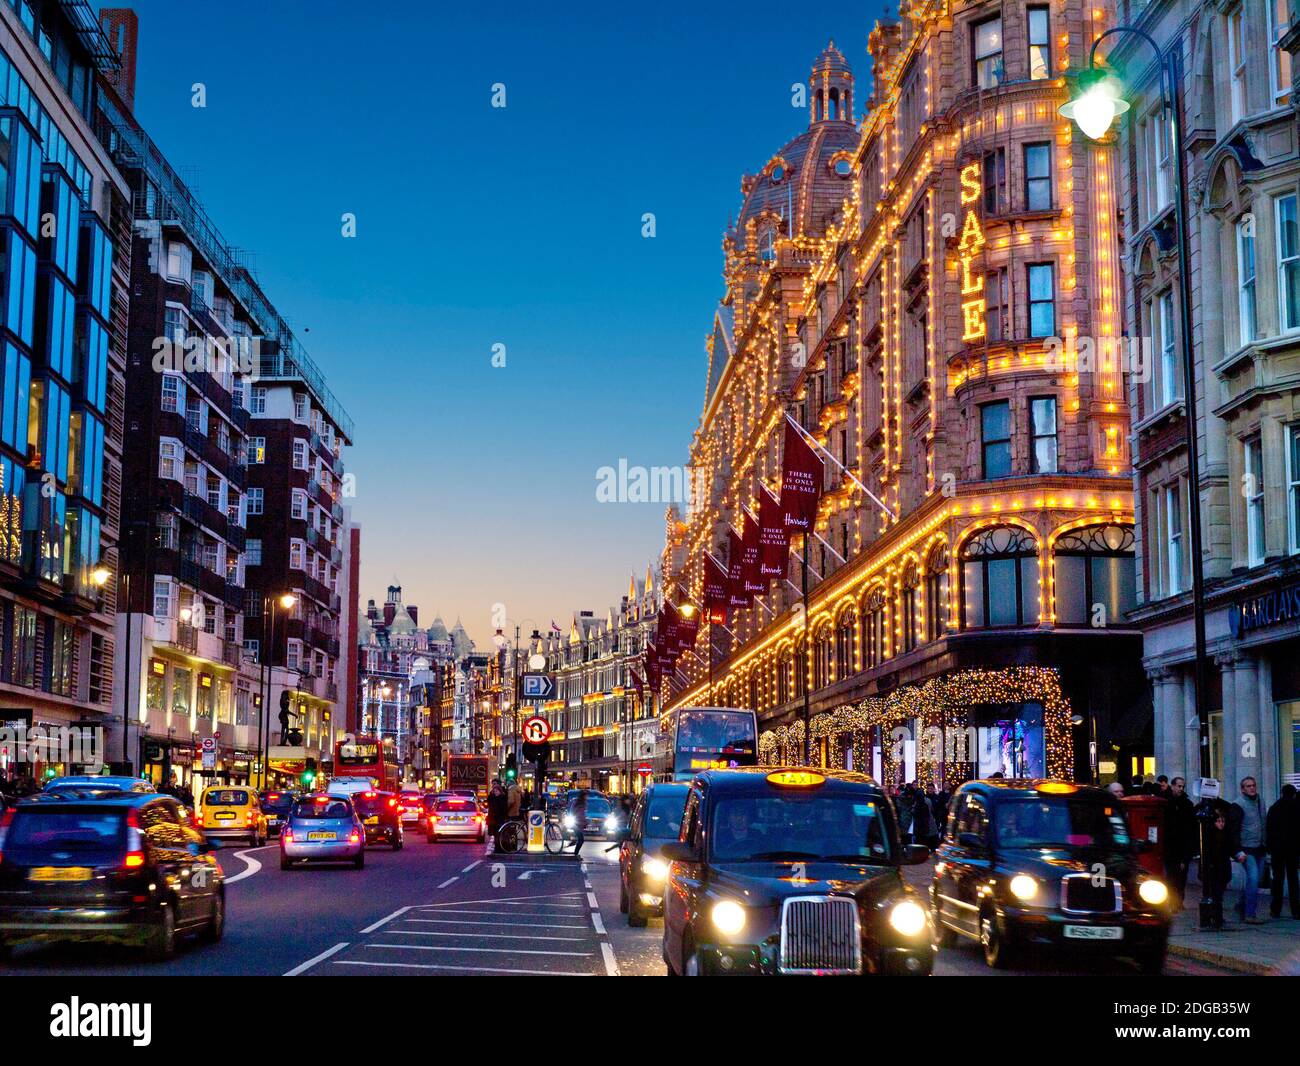 BROMPTON ROAD SUNSET ULEZ HARRODS SALE KNIGHTSBRIDGE SALES TAXIS Brompton Road busy winter sales dusk sunset shops including Harrods store at dusk with lit 'Sale' sign shoppers red buses and black cabs Knightsbridge London SW1 Stock Photo